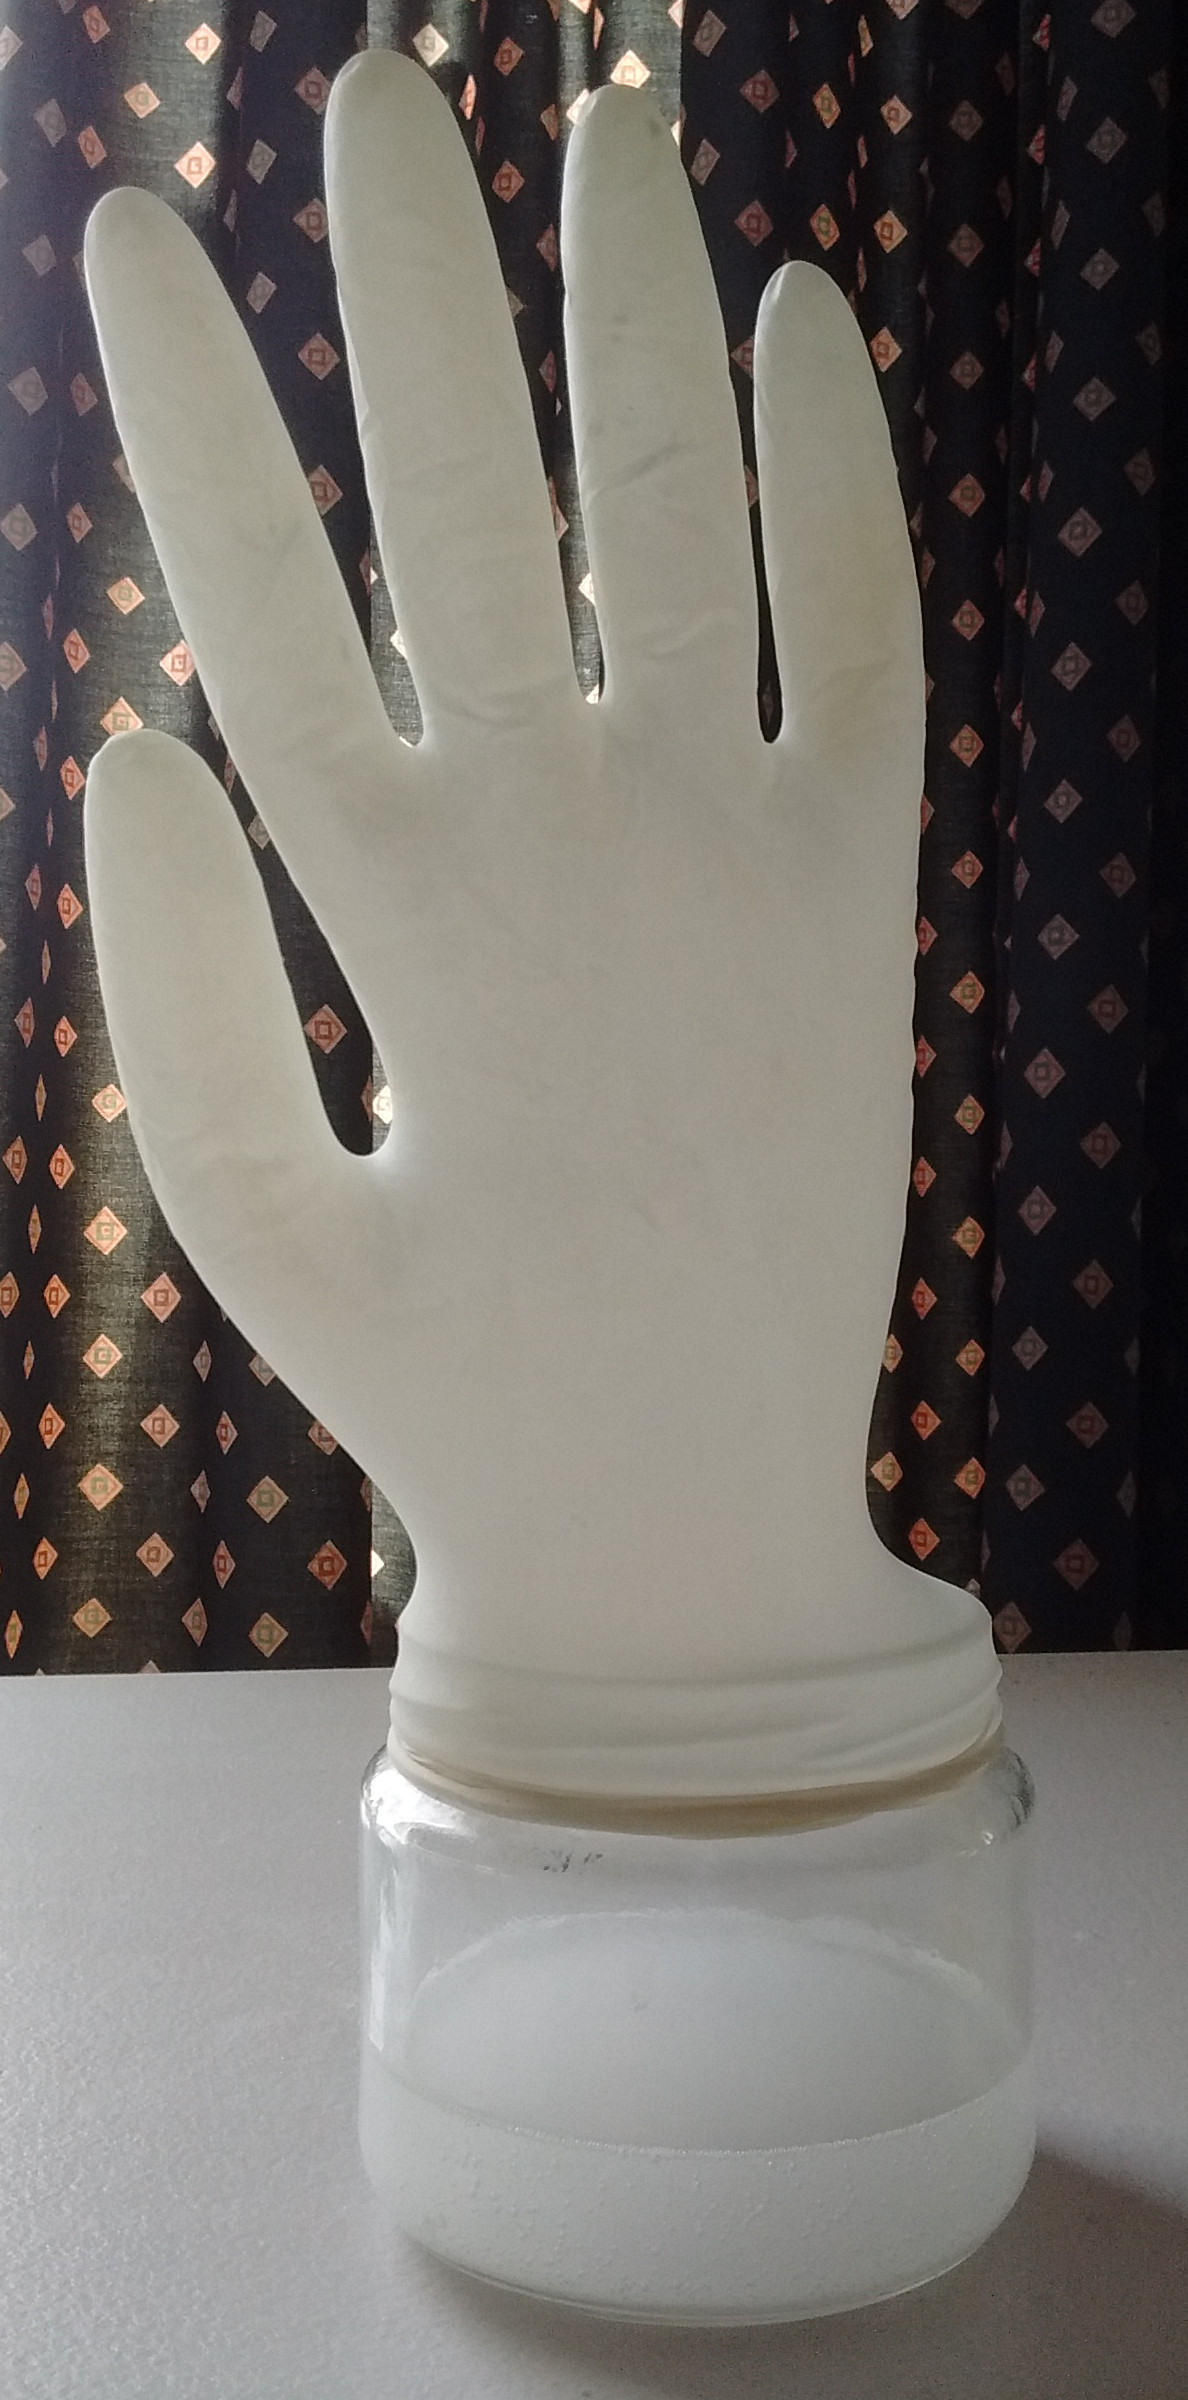 The Ghostly Hand